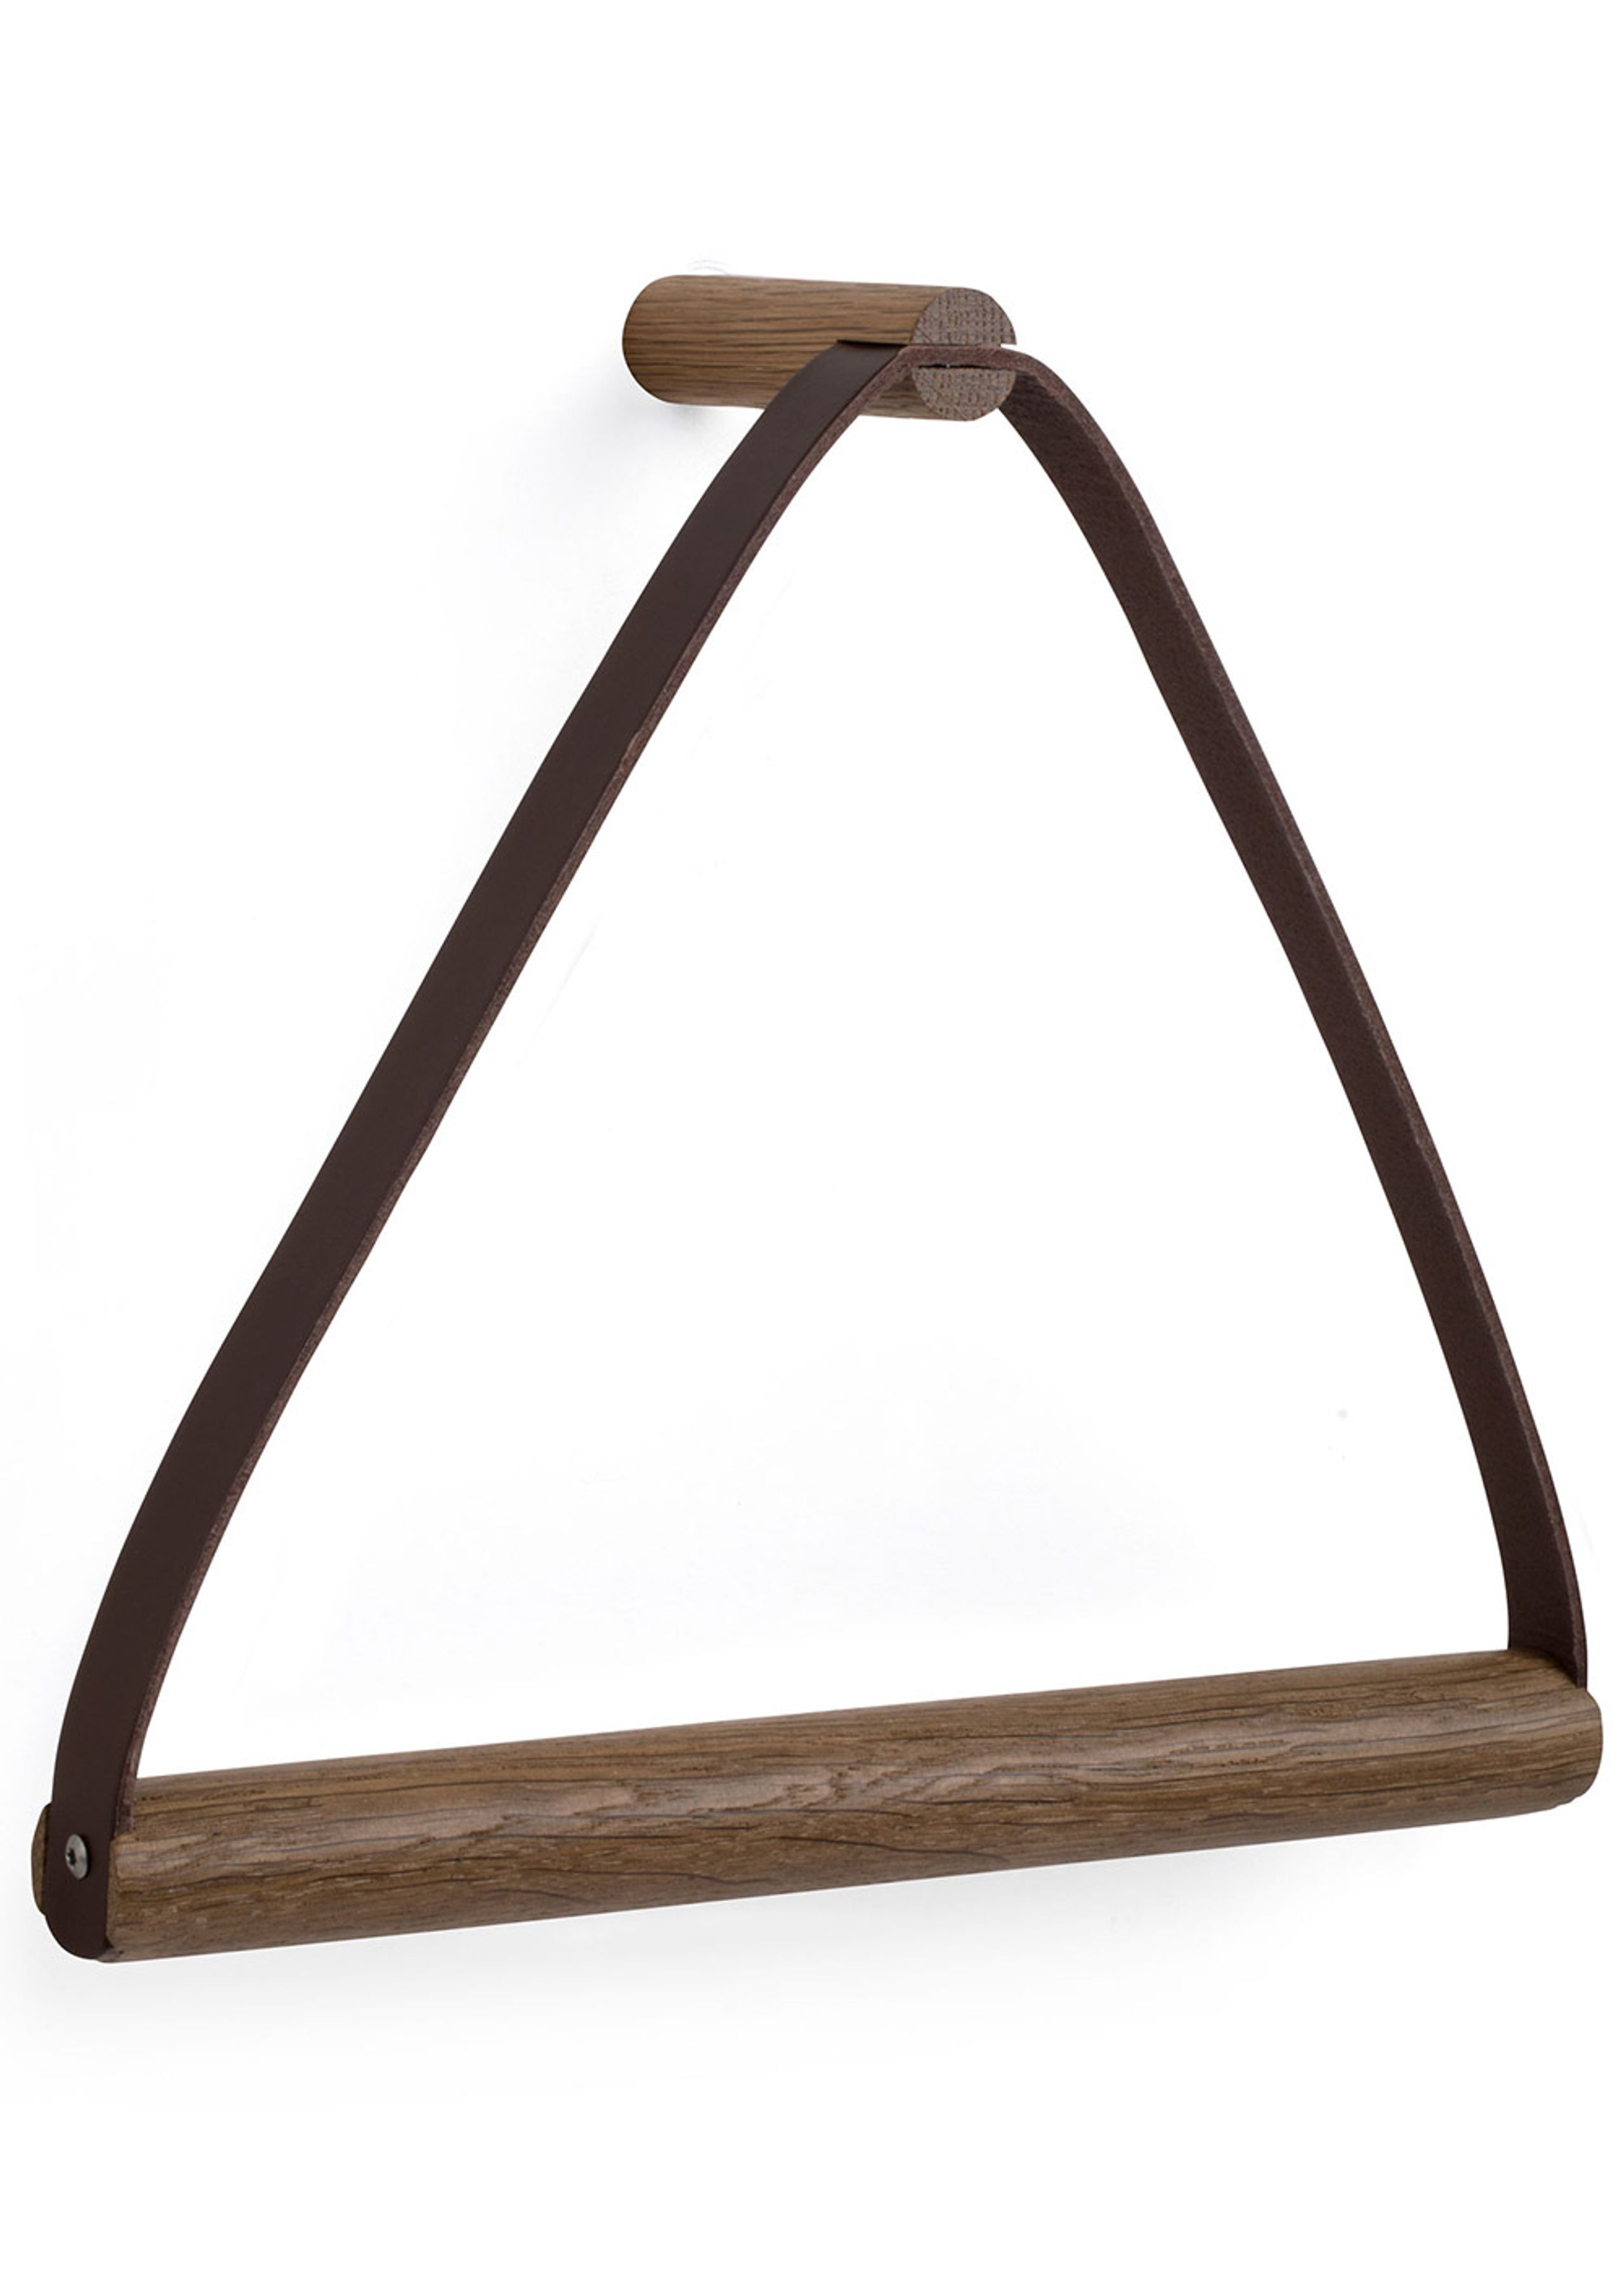 By Wirth - Toalheiro - Towel Hanger - Smoked oak & leather